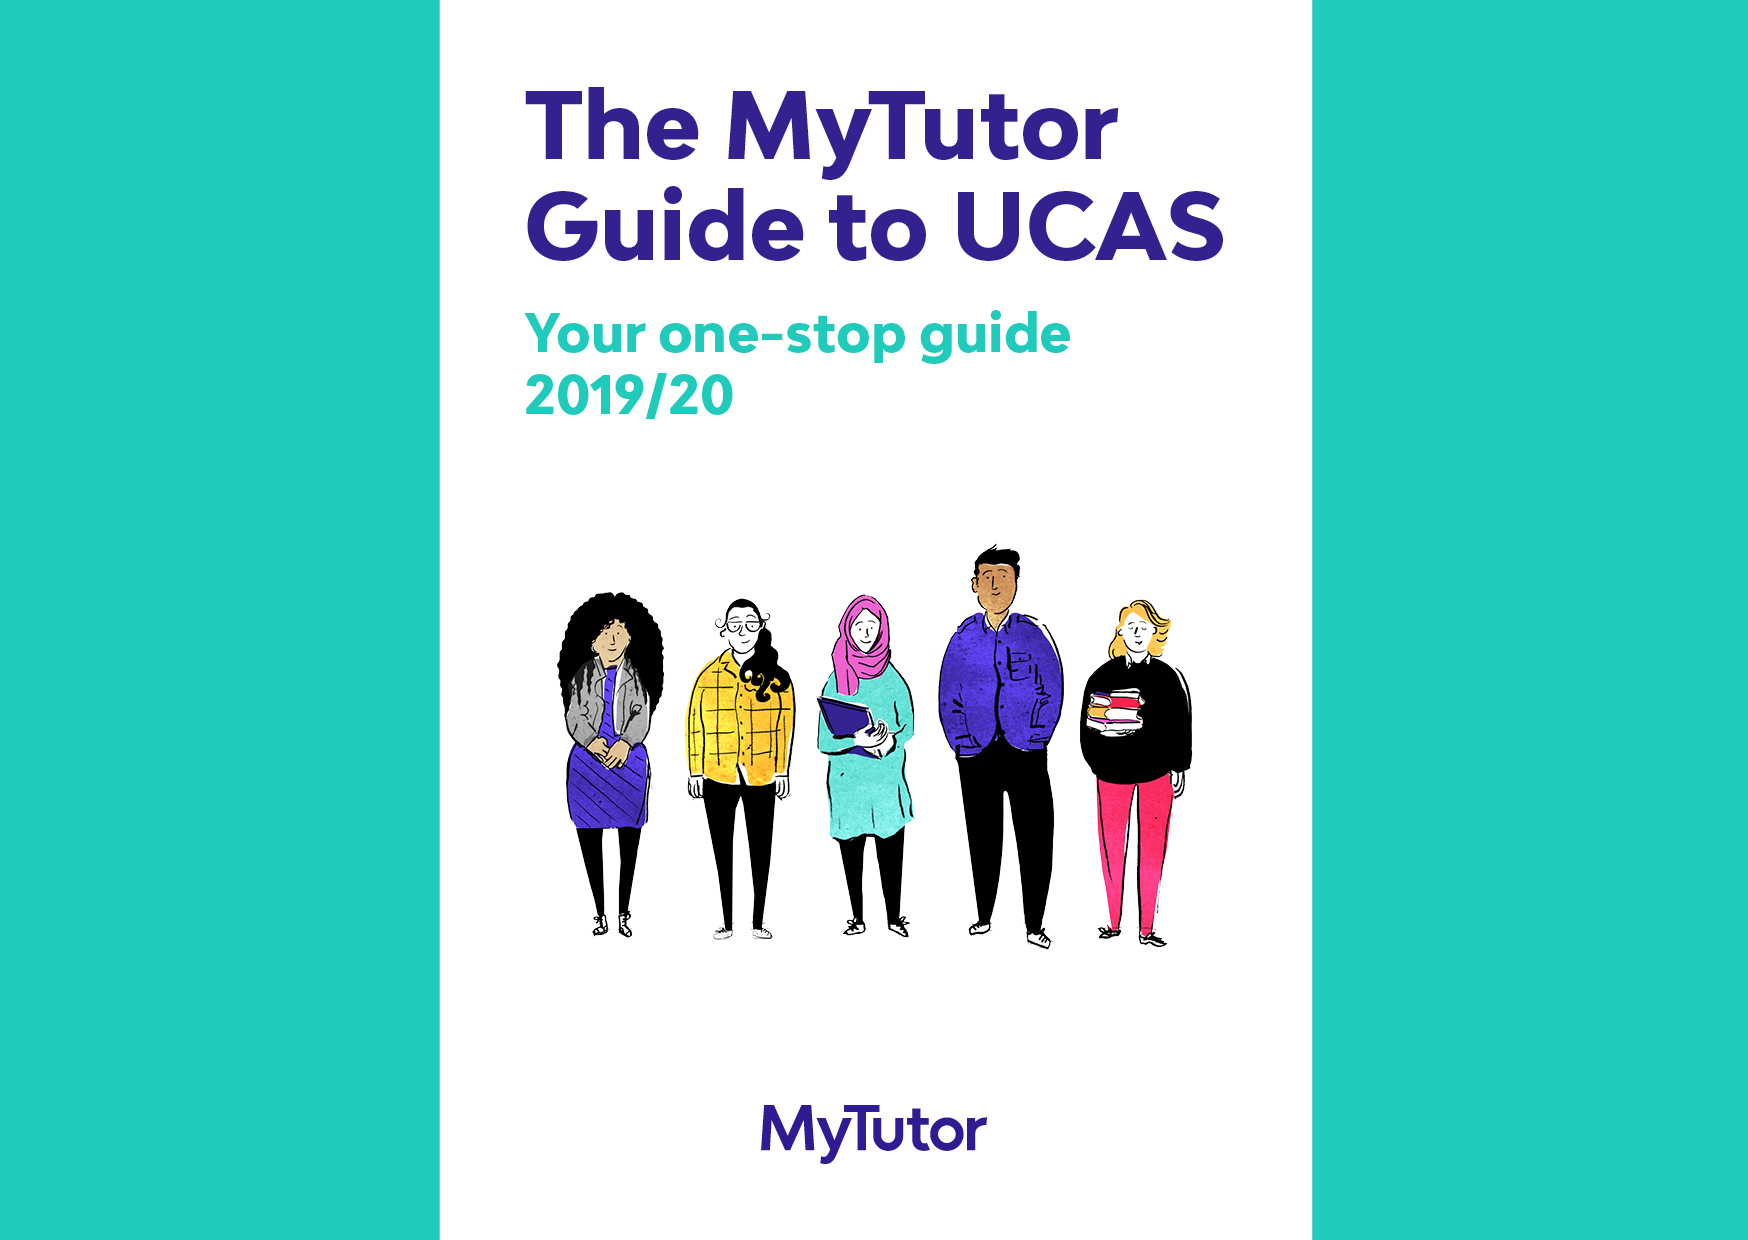 Guide to UCAS_7 - Spreads (Cover)3